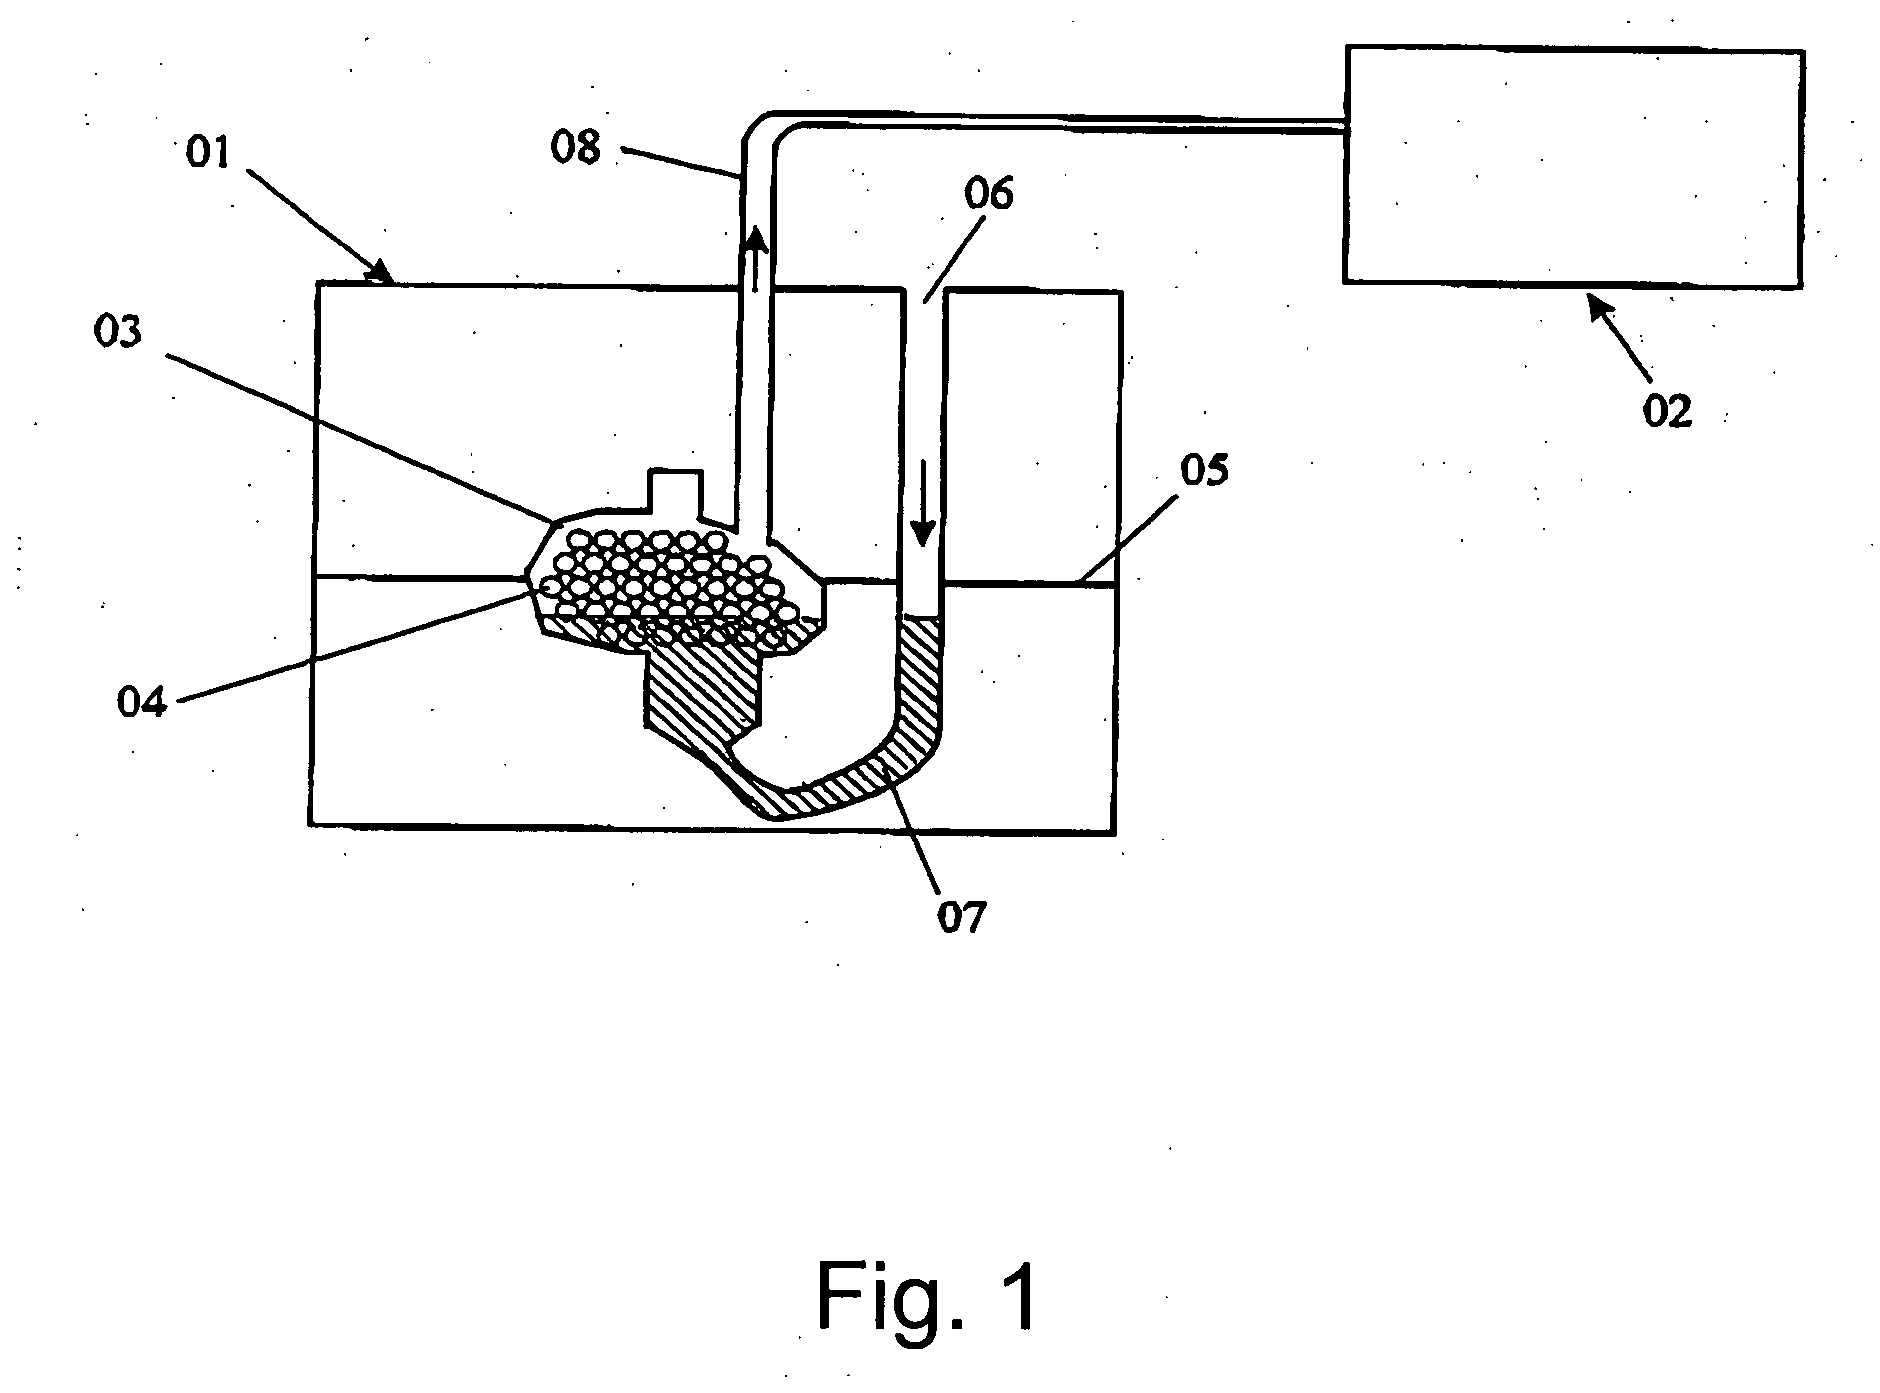 Method for manufacturing open porous components of metal, plastic or ceramic with orderly foam lattice structure